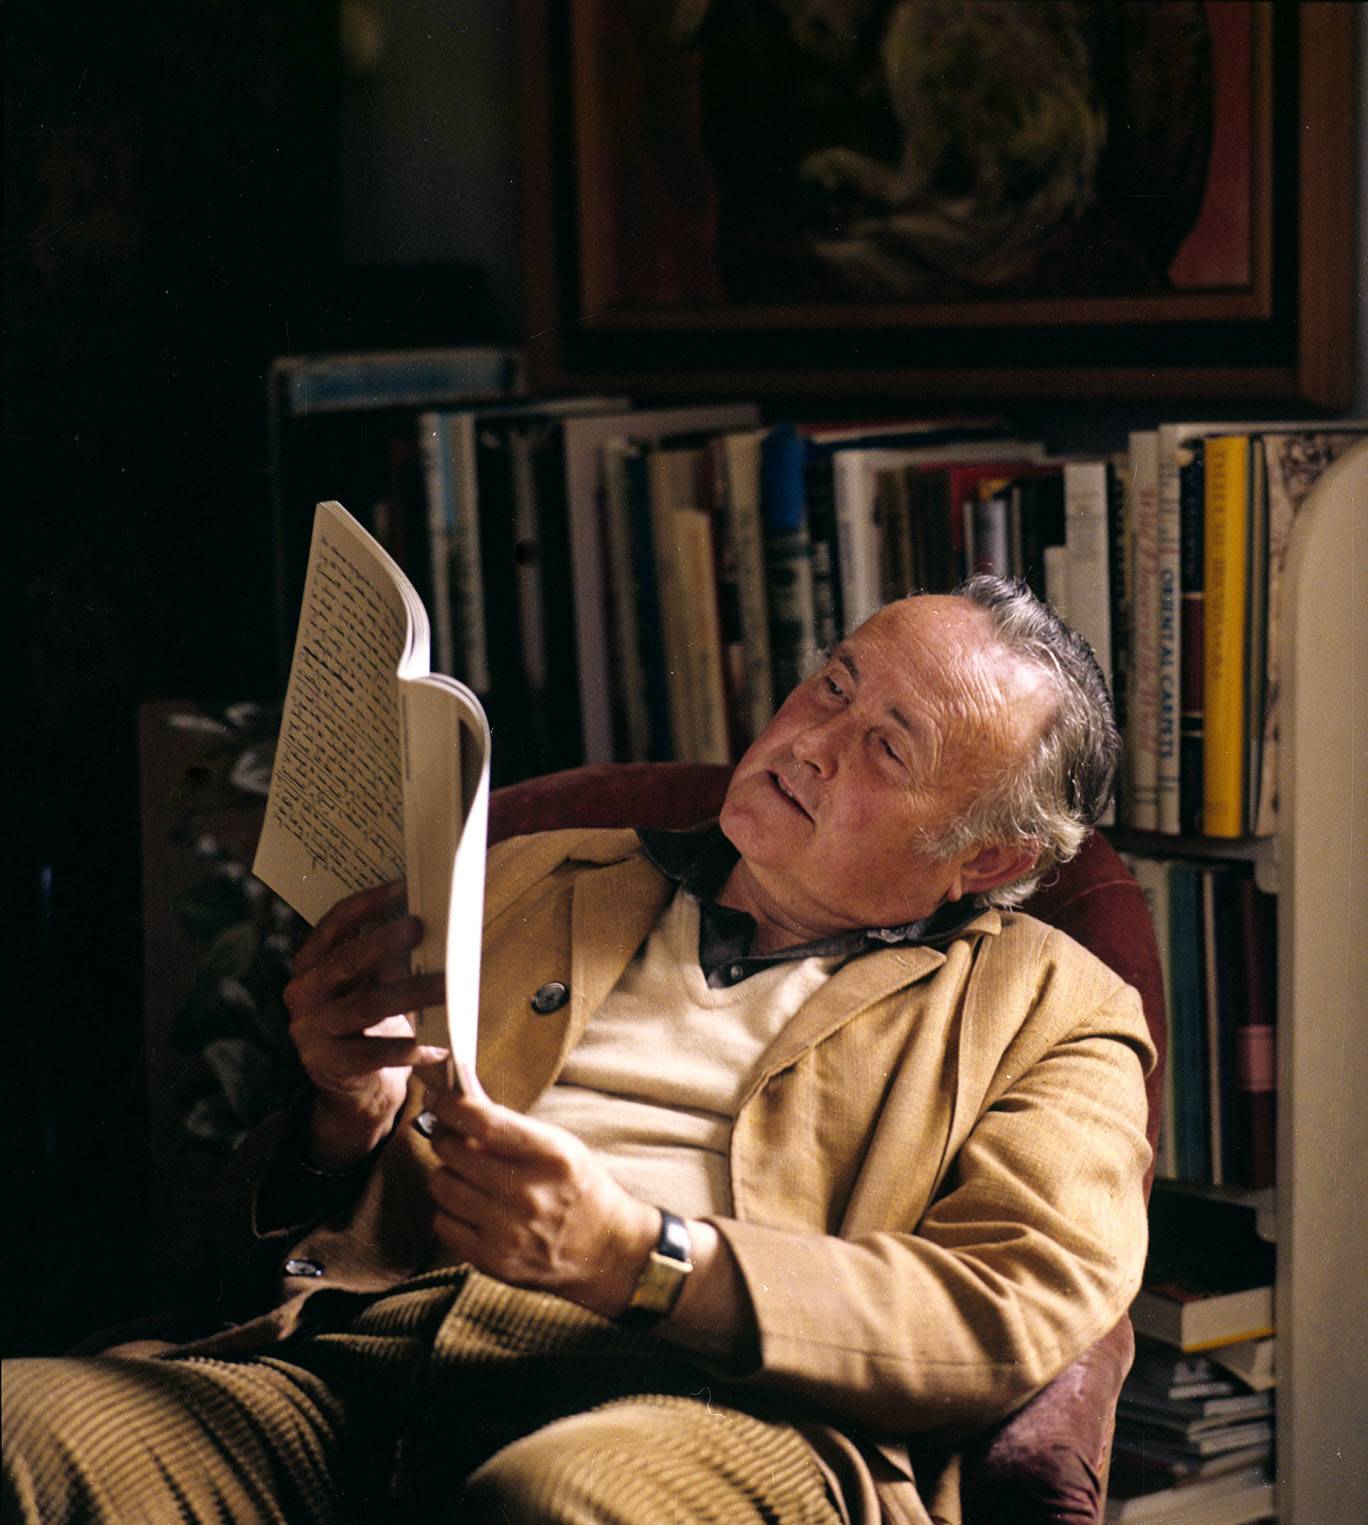 The photograph shows artist Derek Hill reading a book. He is sitting in an armchair in front of a bookcase. His head is tilted sideways as he directs the pages of the book to catch the light.